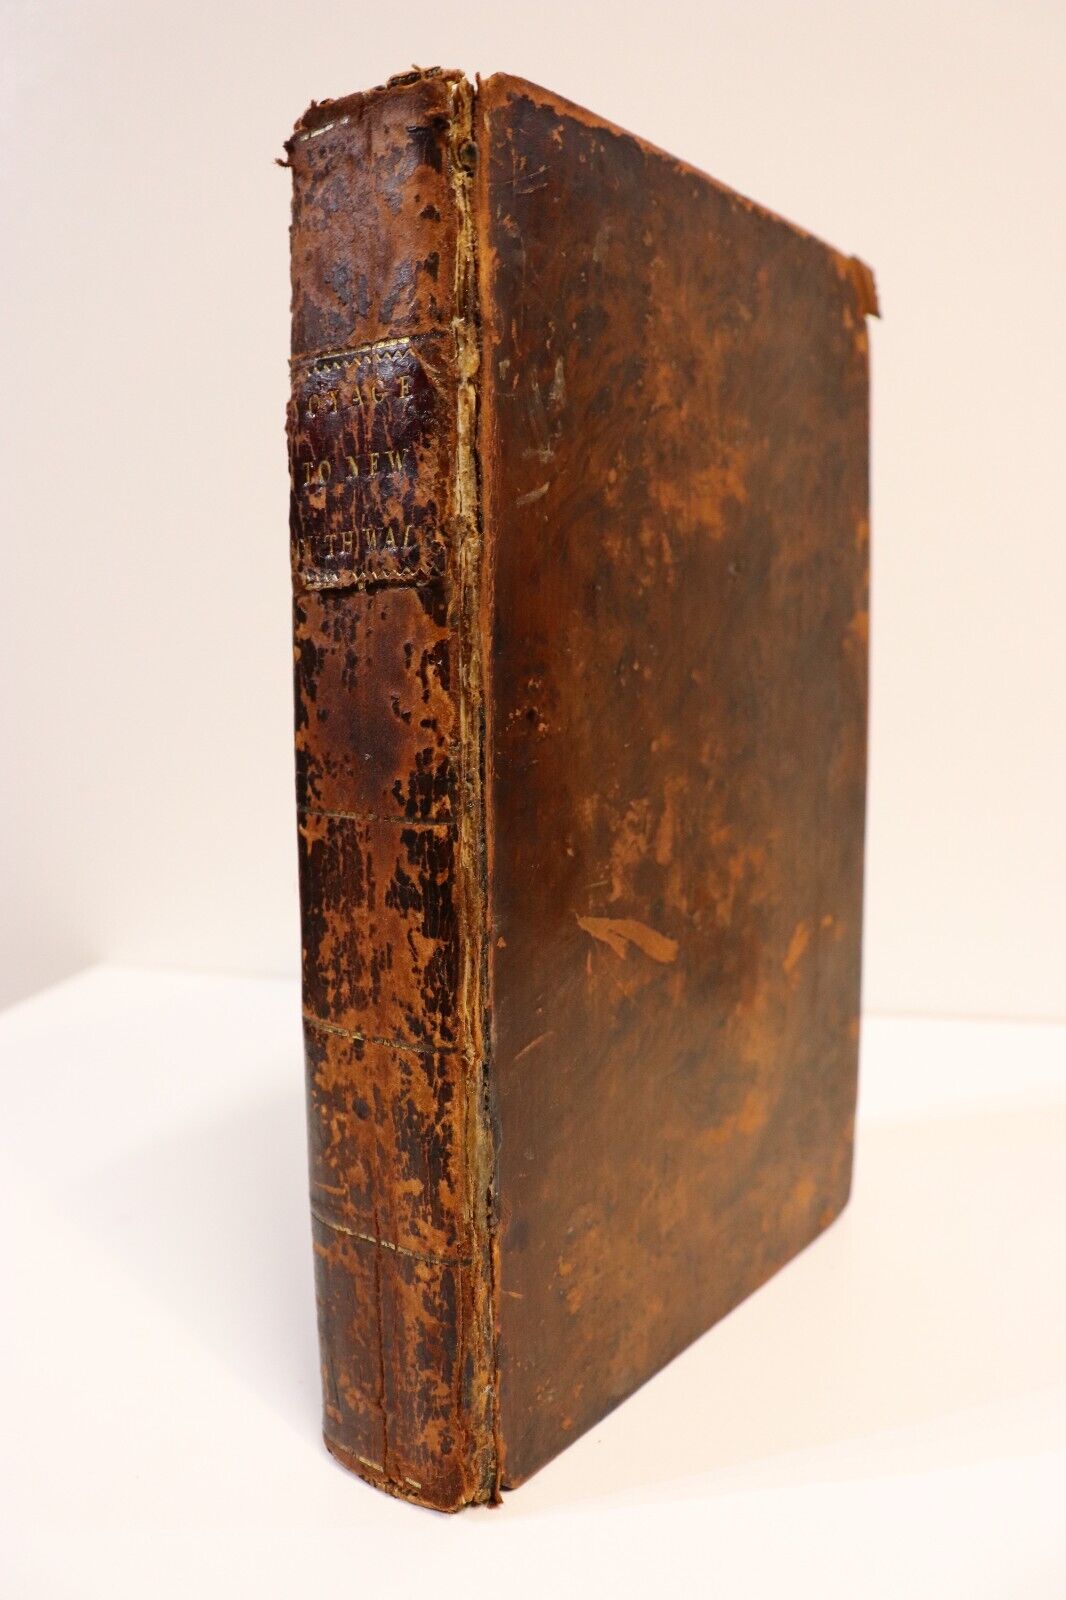 1803 Voyage To New South Wales by George Barrington Antiquarian Australian Book